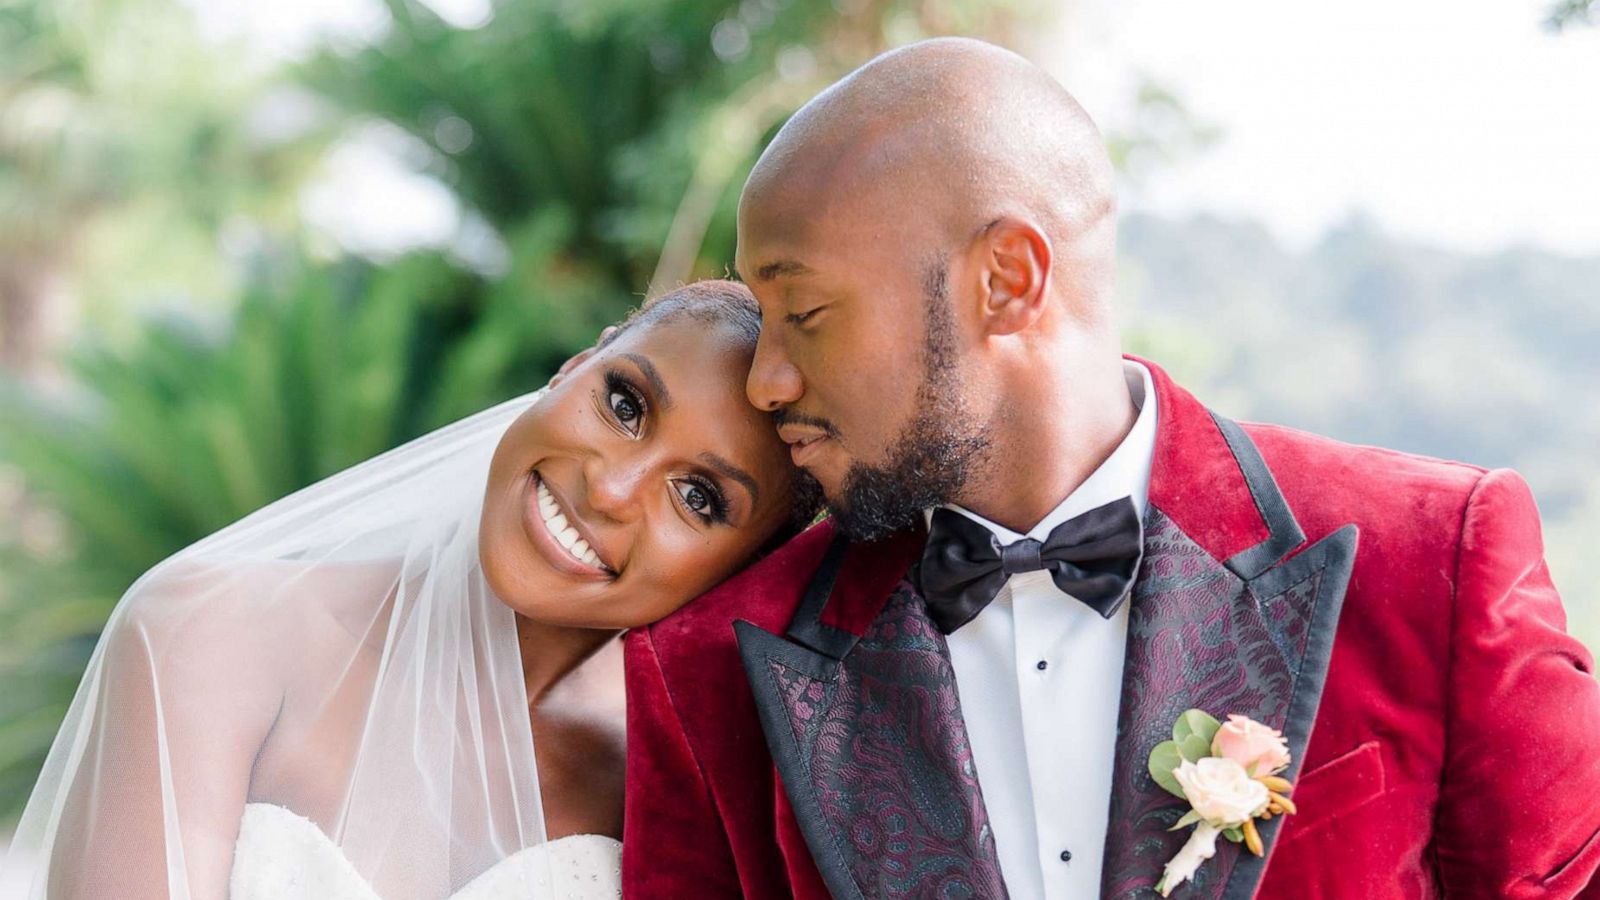 Issa Rae announces marriage to Louis Diame: See the stunning